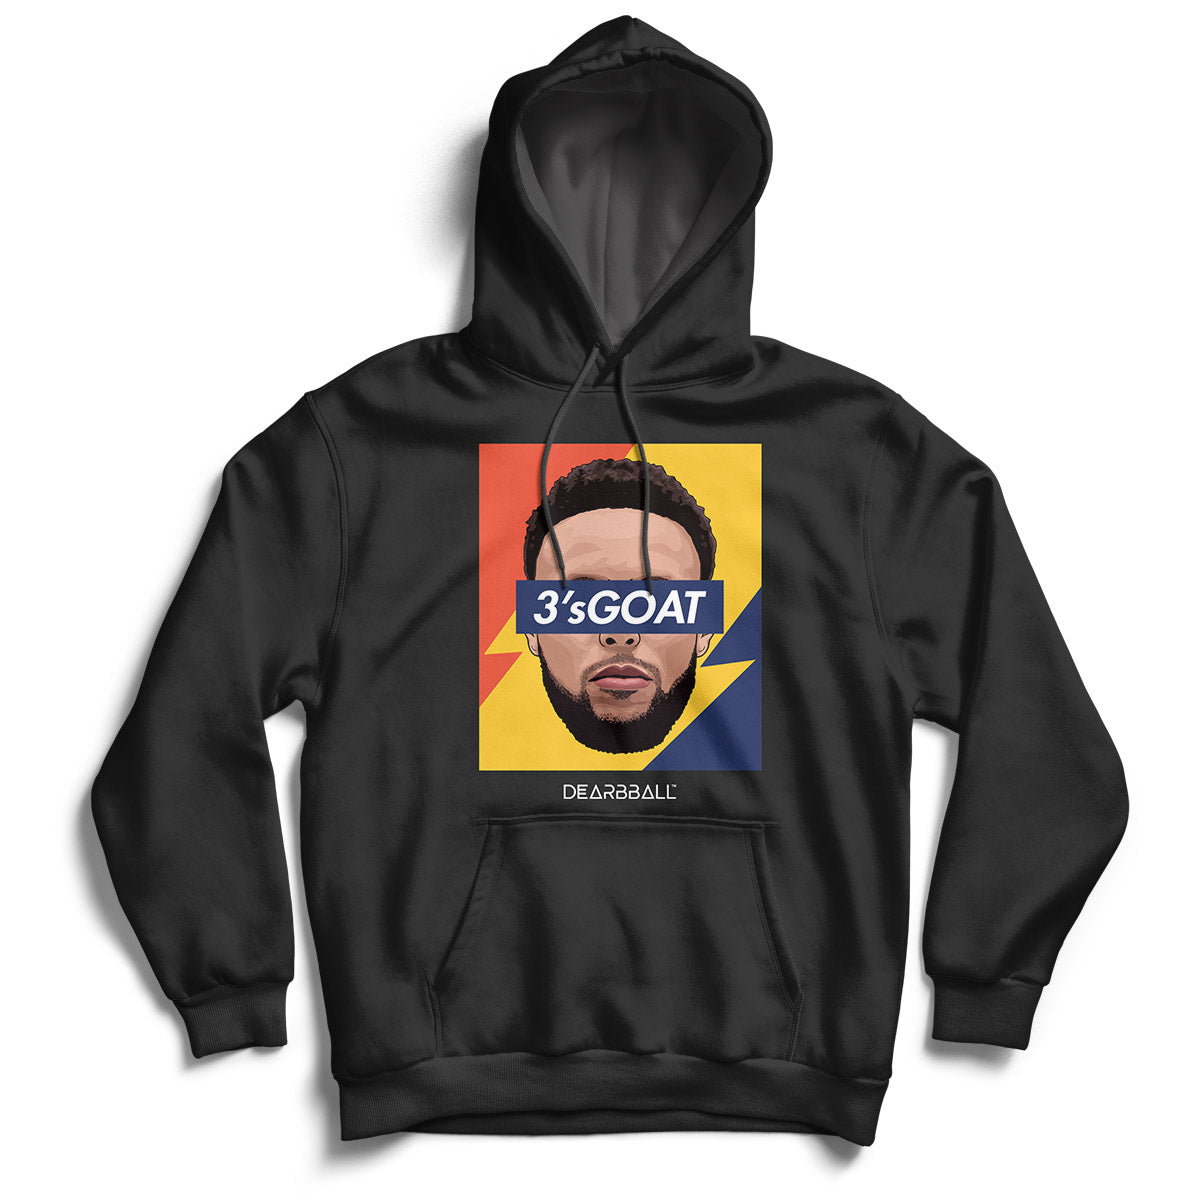 DEARBBALL HOODIE STEPHEN CURRY - 3PT GOAT ECLAIR SUPREMACY